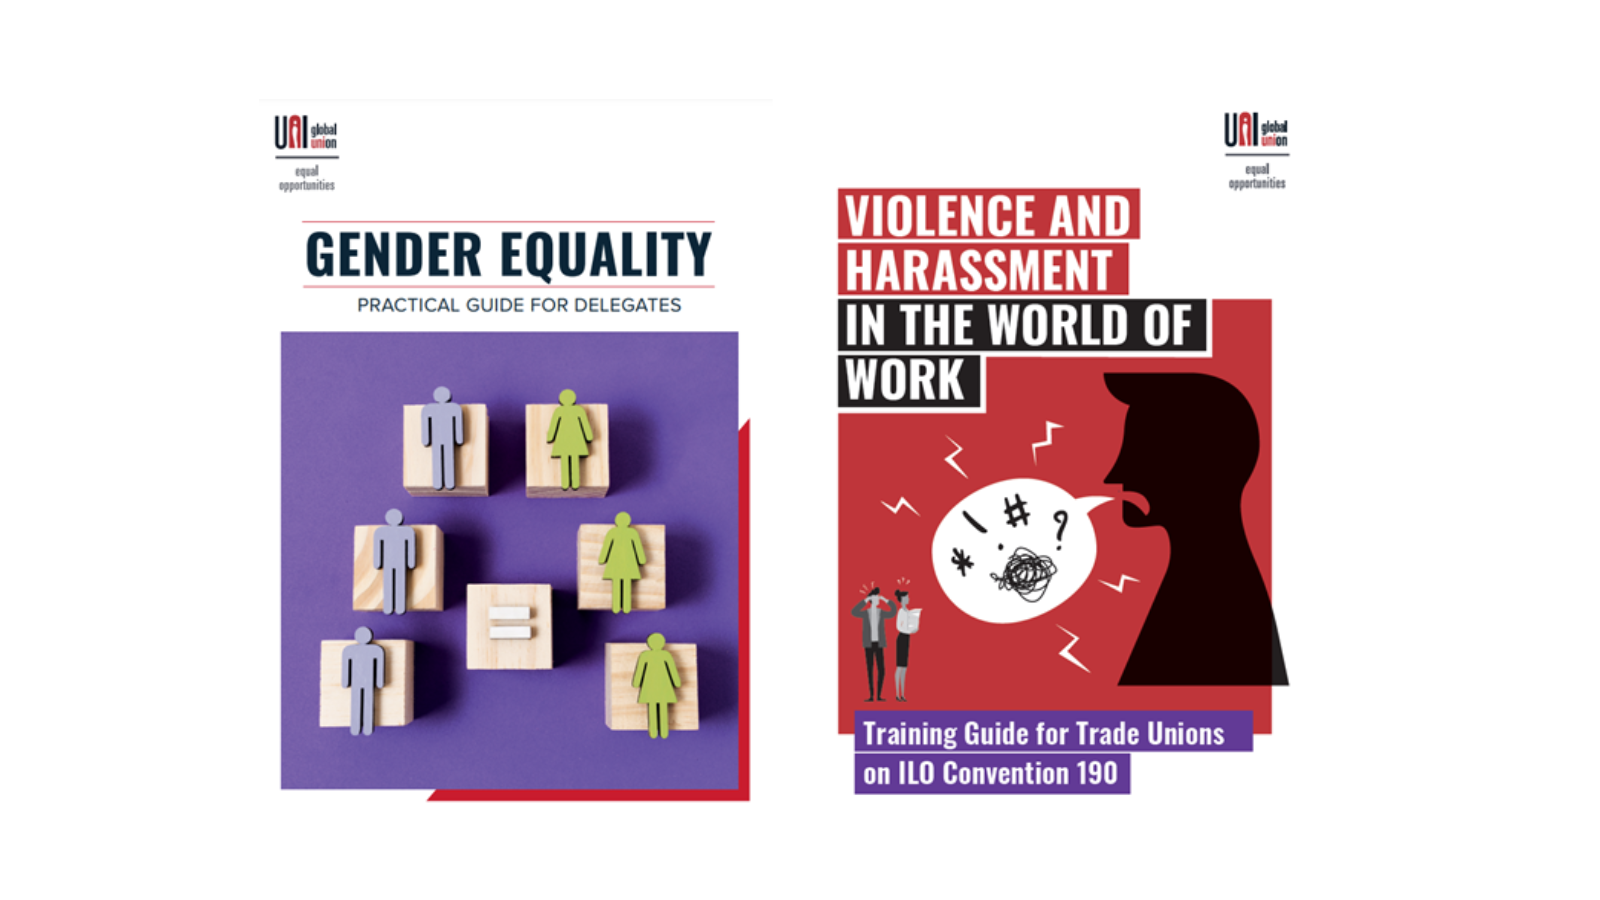 navneord stang tuberkulose UNI publishes guides to support gender equality in Asia-Pacific - UNI  Global Union